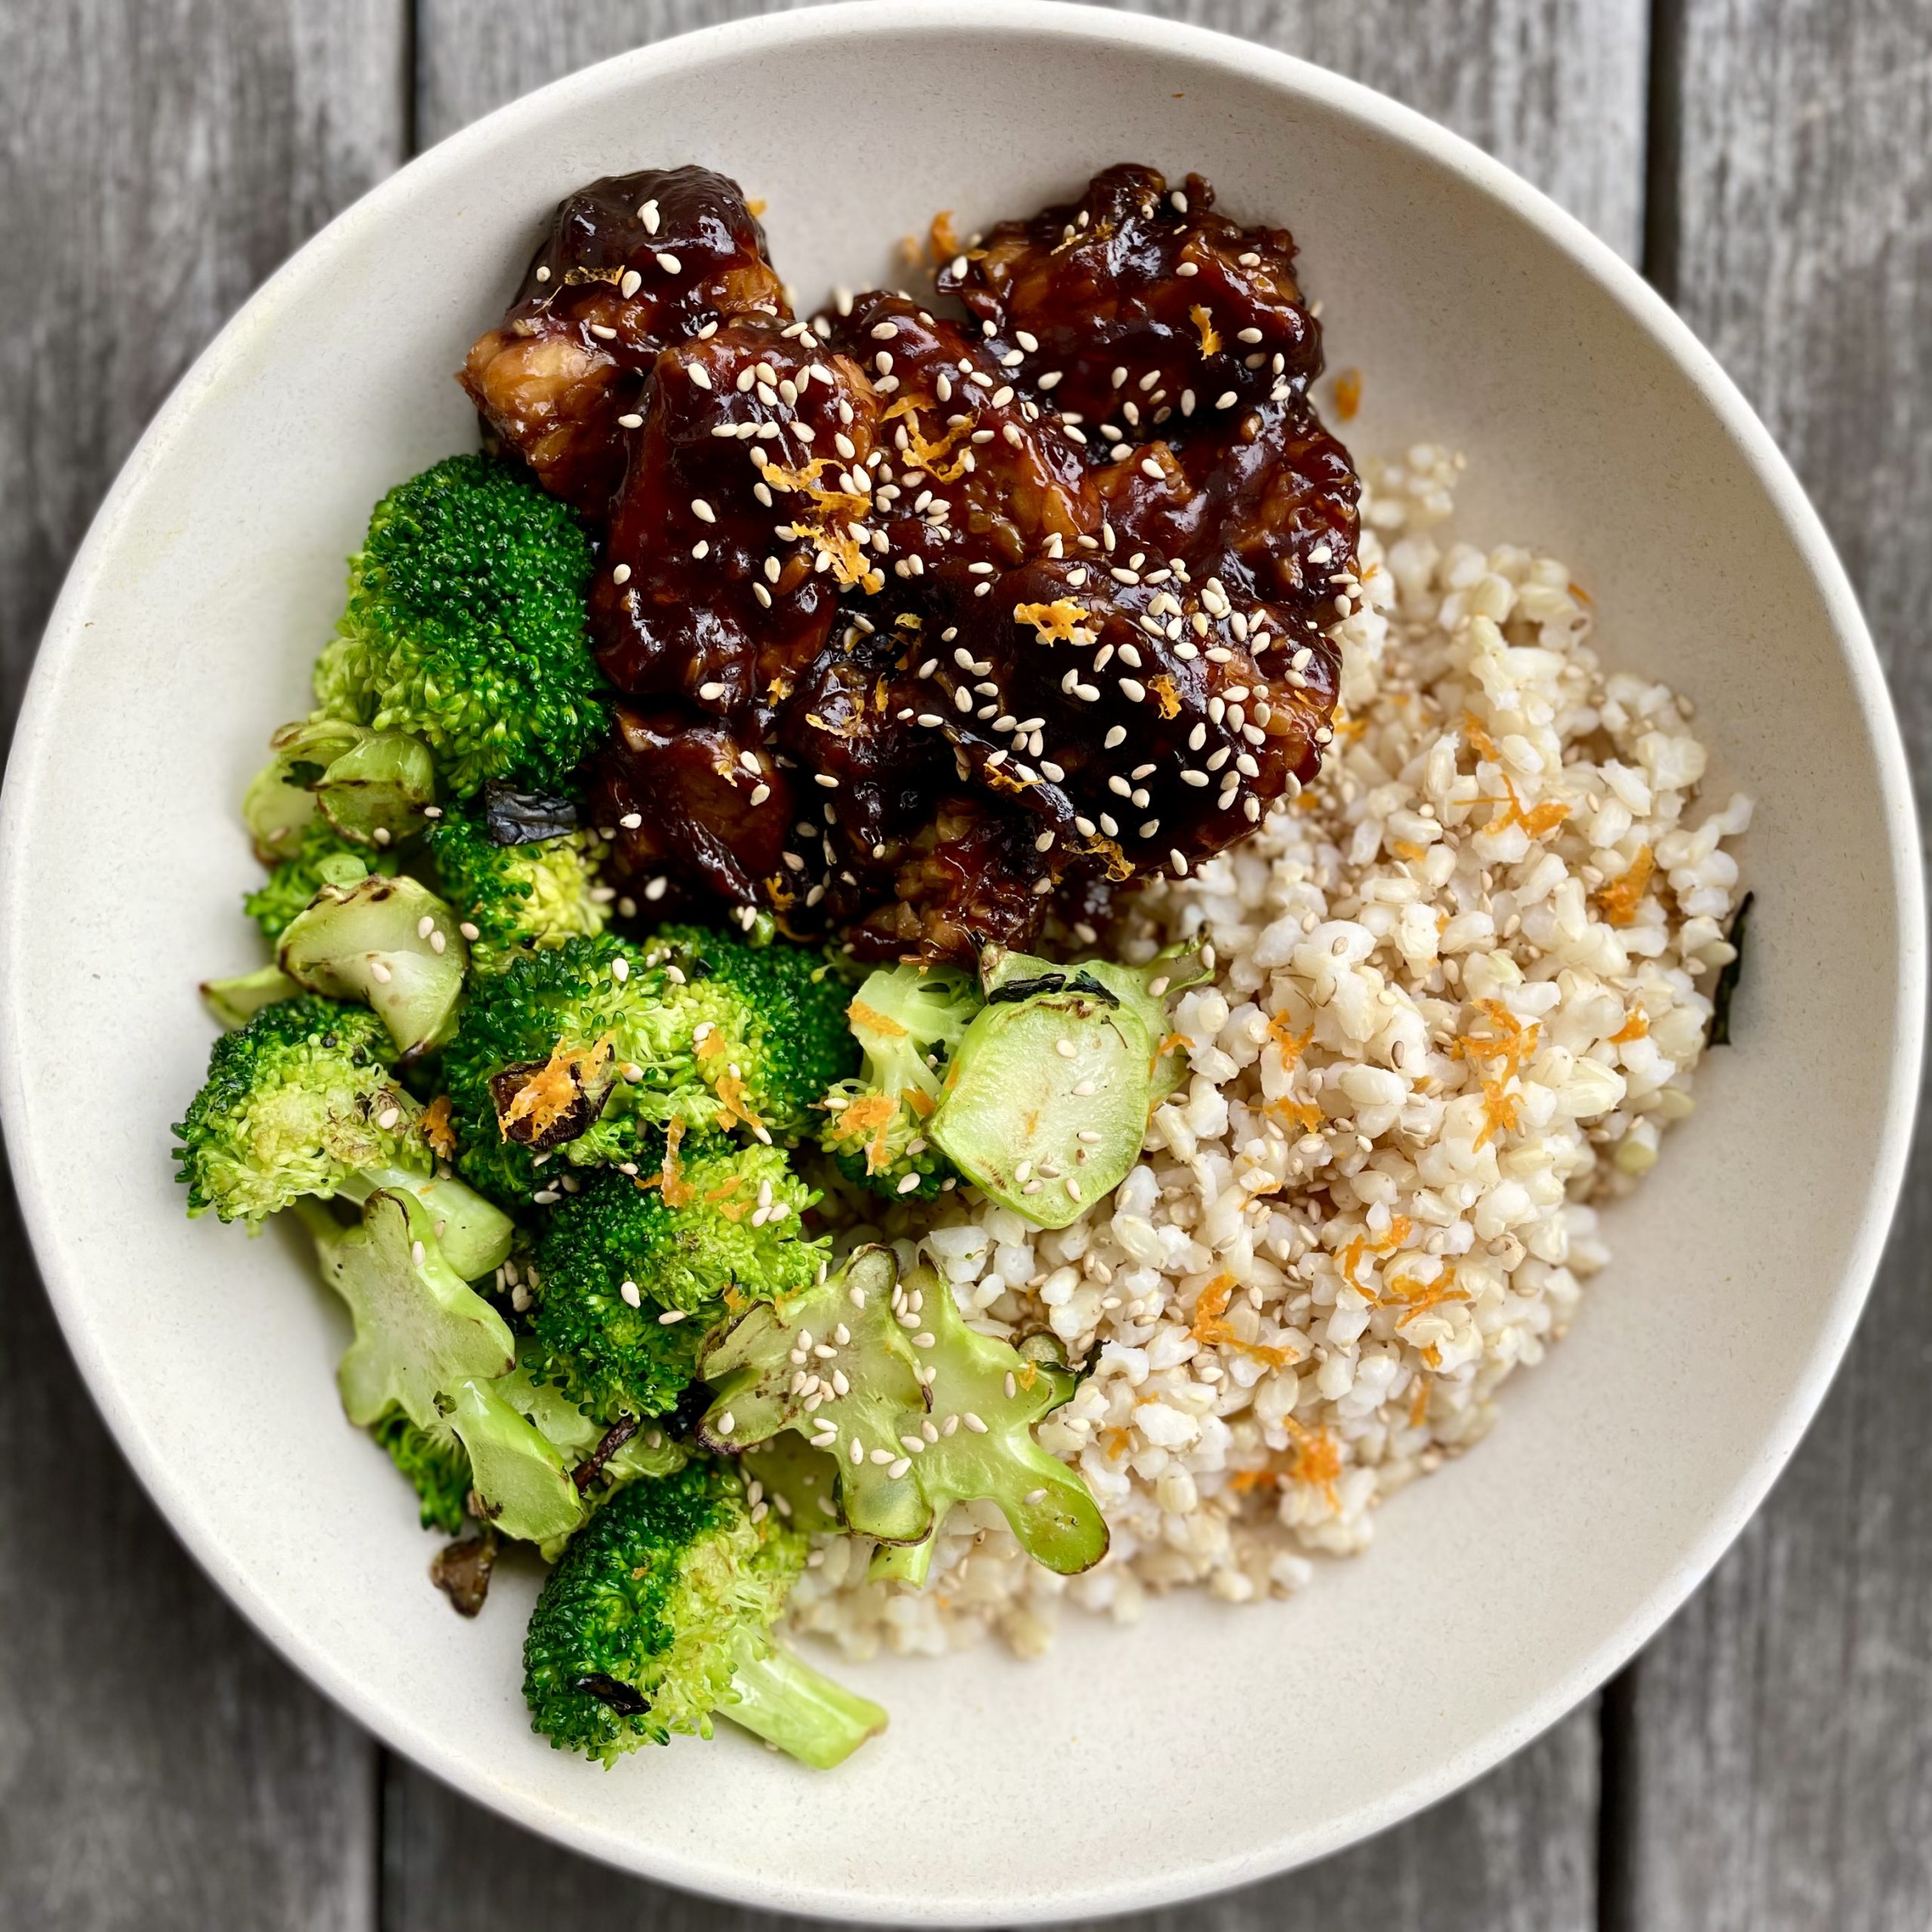 general tso’s-inspired tempeh with broccoli florets & stems